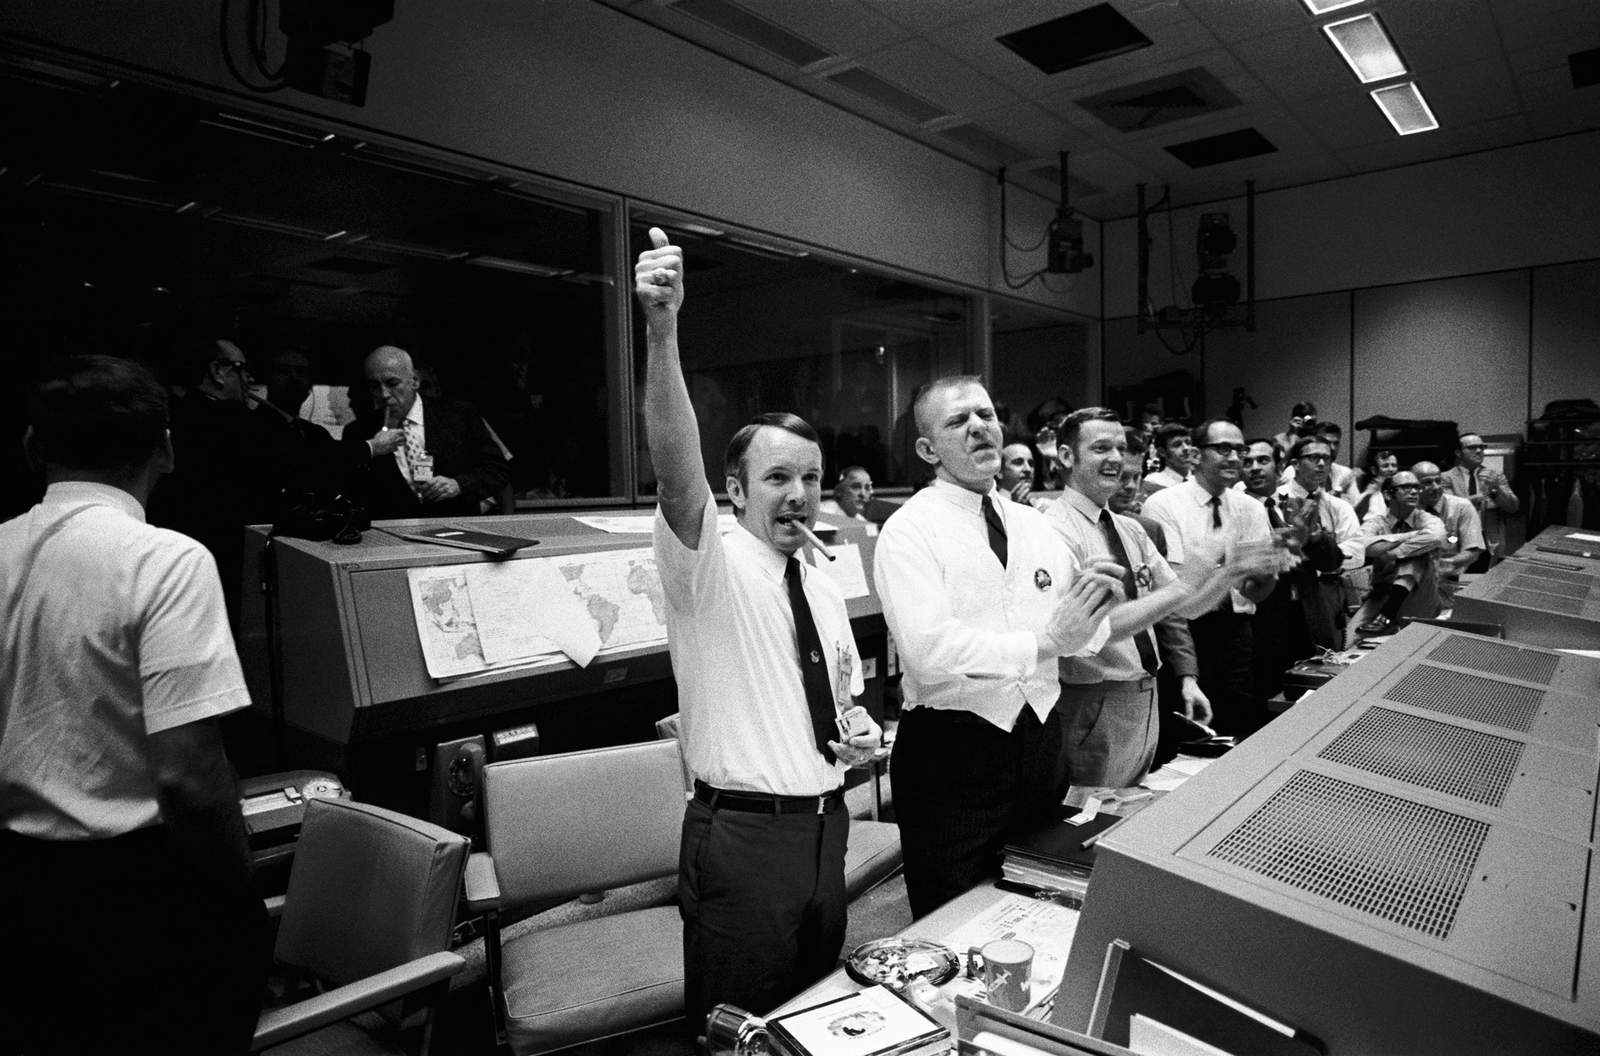 51 years later: 10 things to know about the Apollo 13 mission